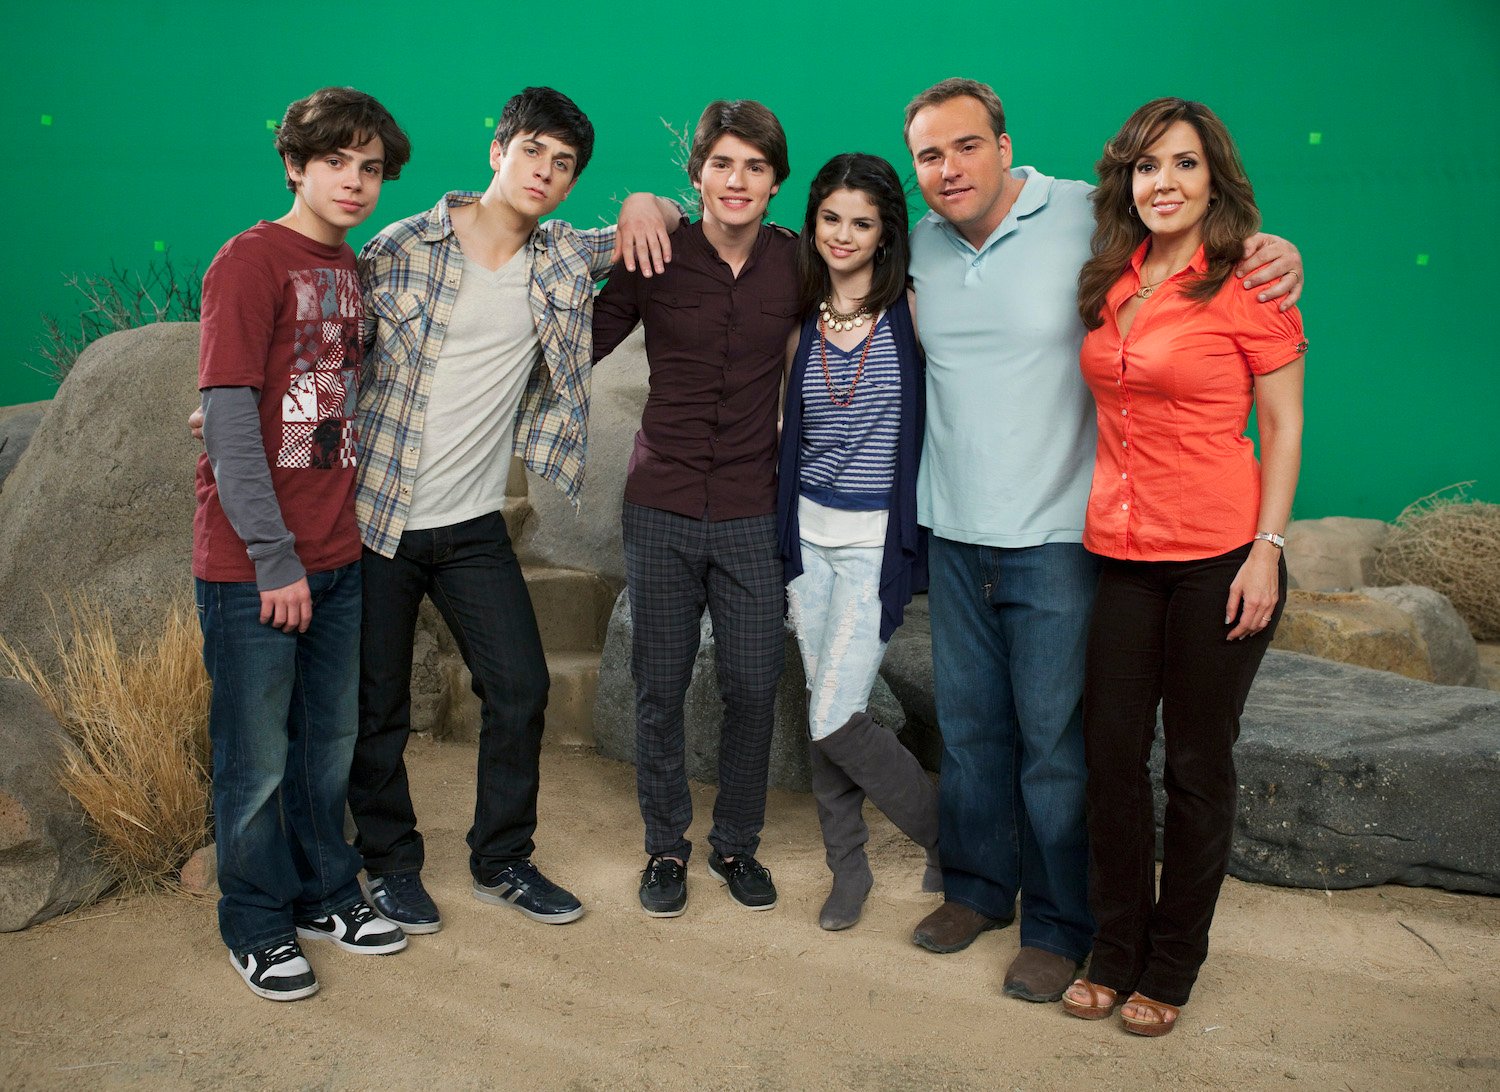 Cast of 'Wizards of Waverly Place'